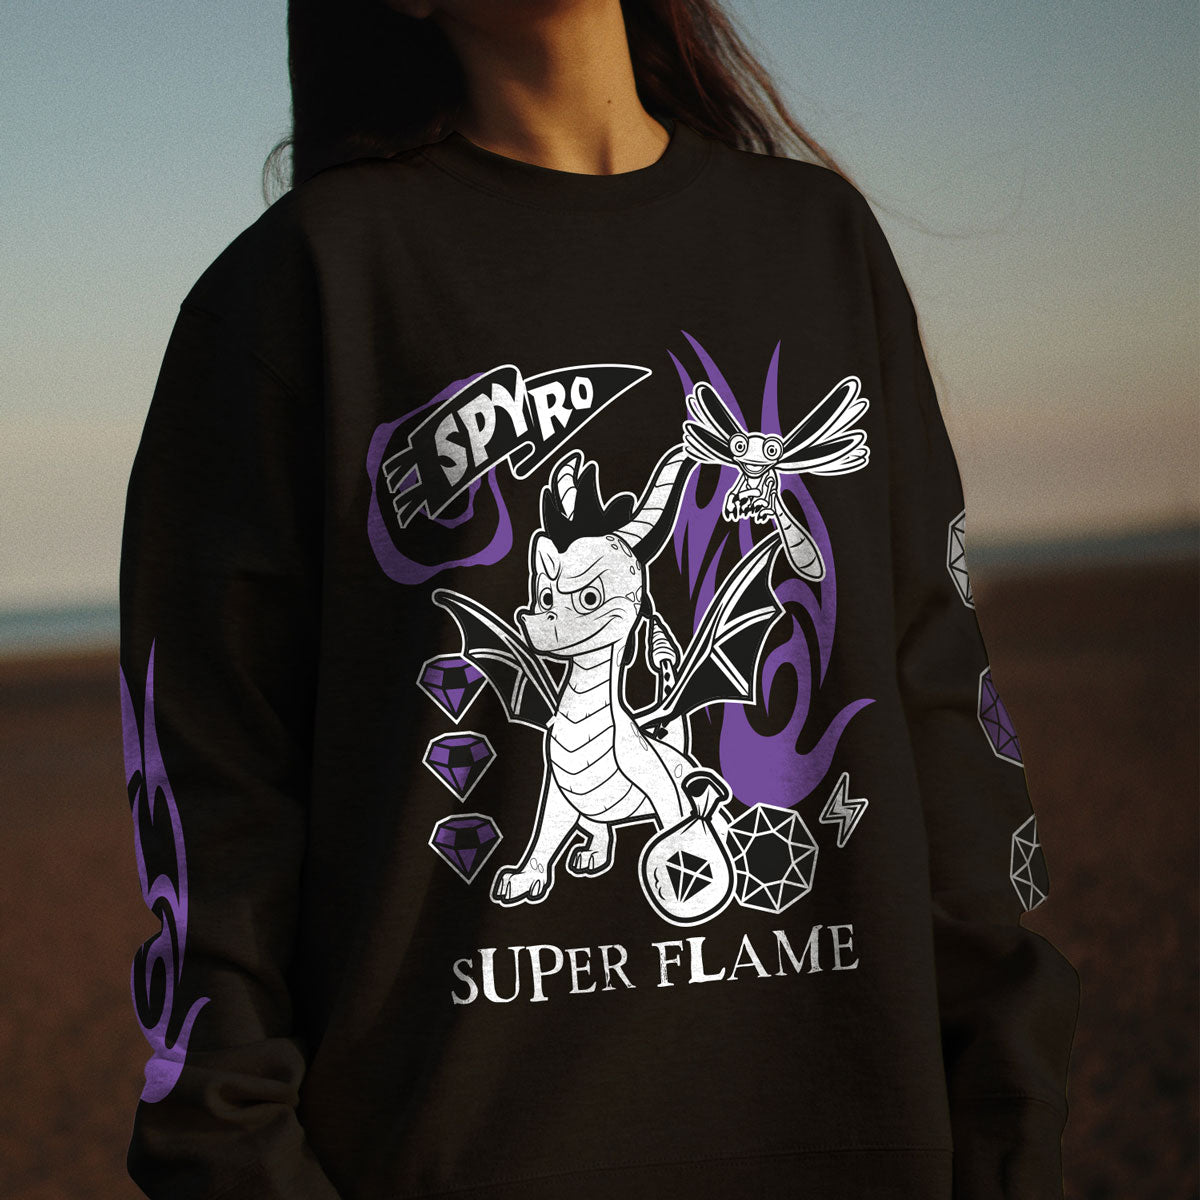 Spyro the Dragon Super Flame Sweatwhirt with Sleeve Prints